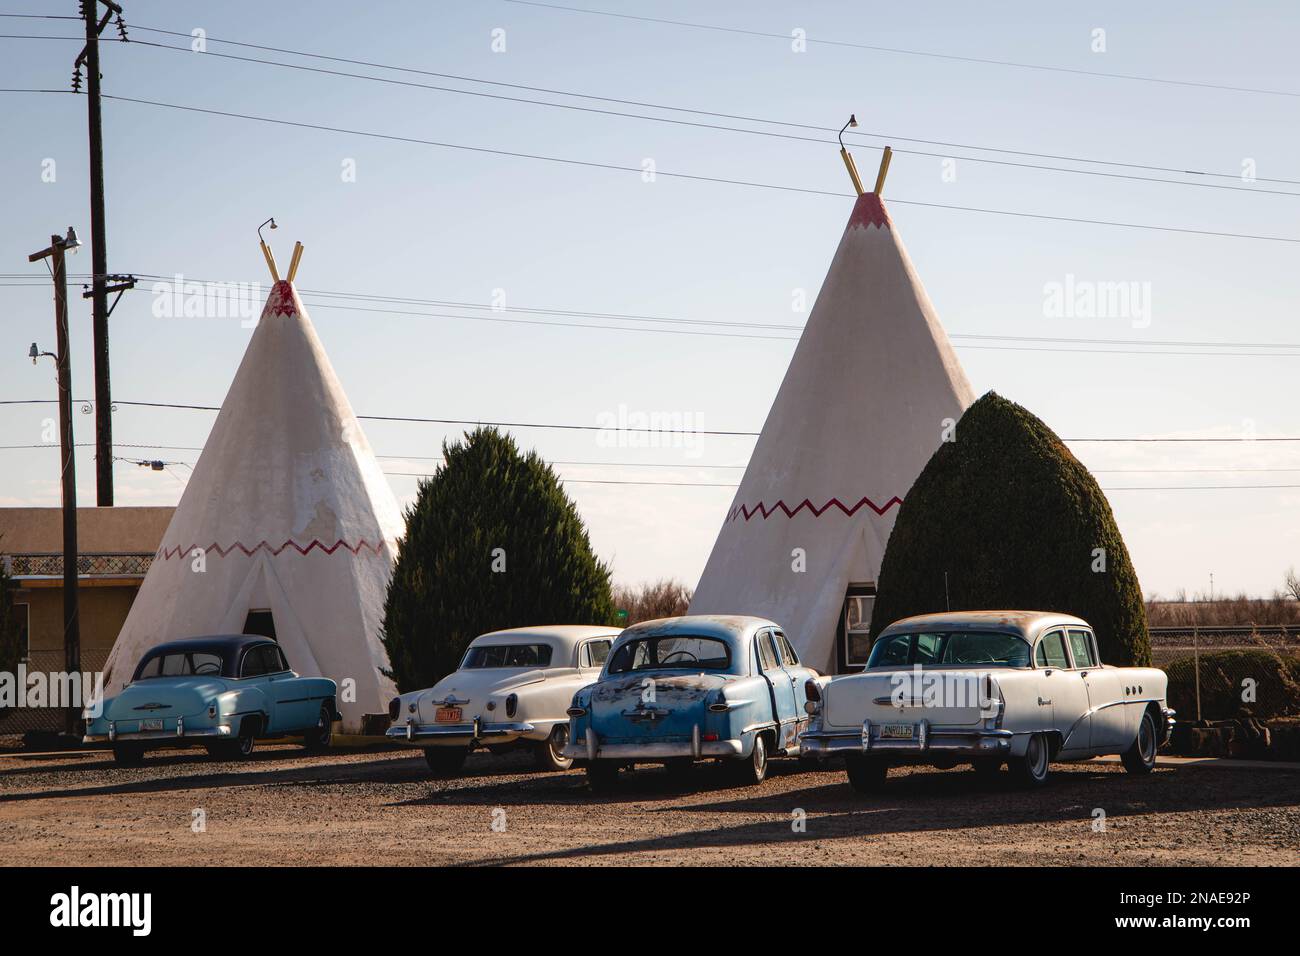 Rusty Classic Cars Parked in front of Teepees at the Wigwam Motel Stock Photo